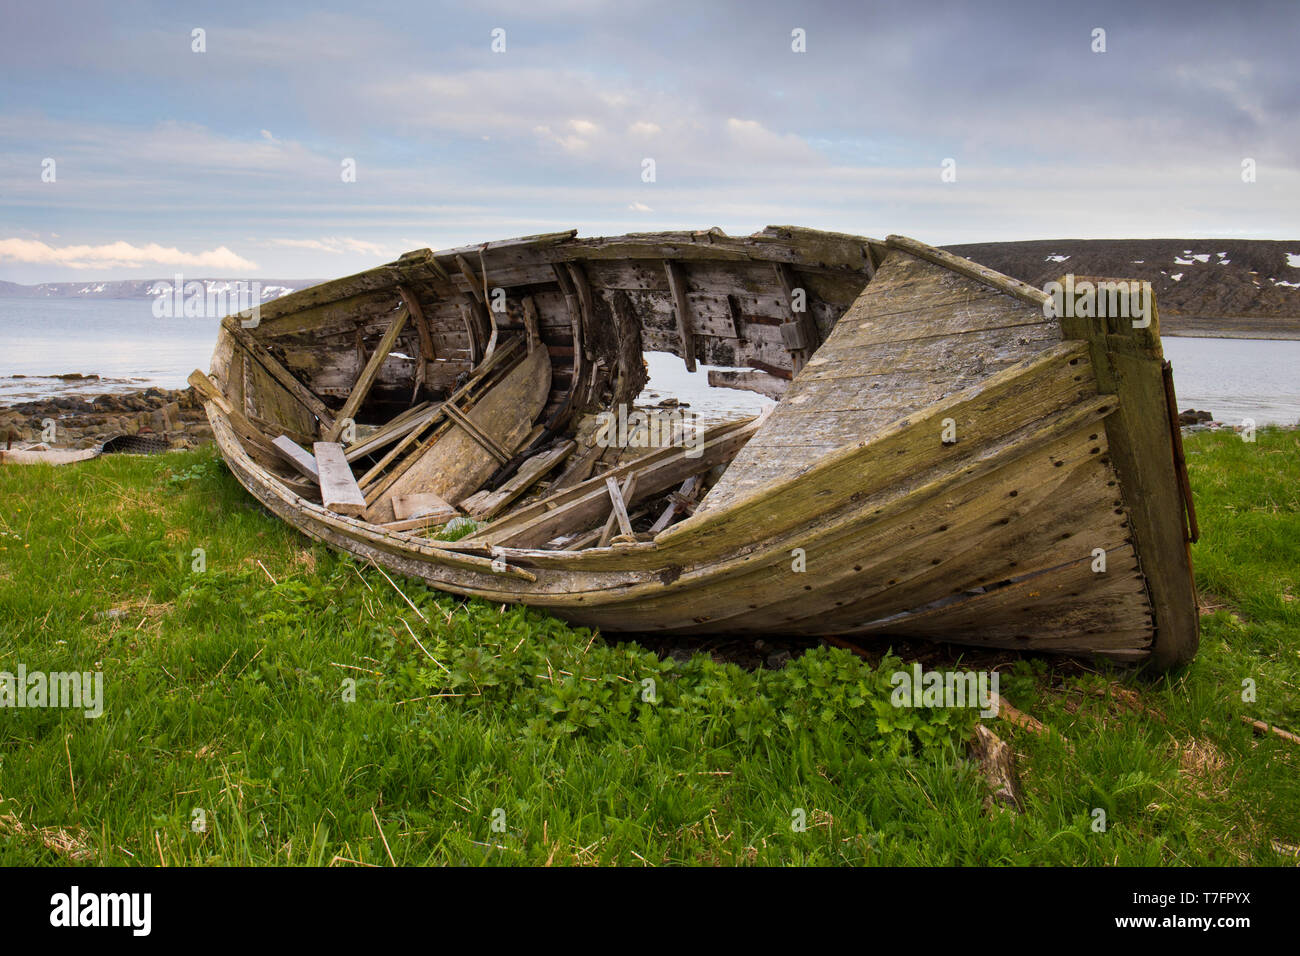 Old boat, laying on the ground close to the sea Stock Photo